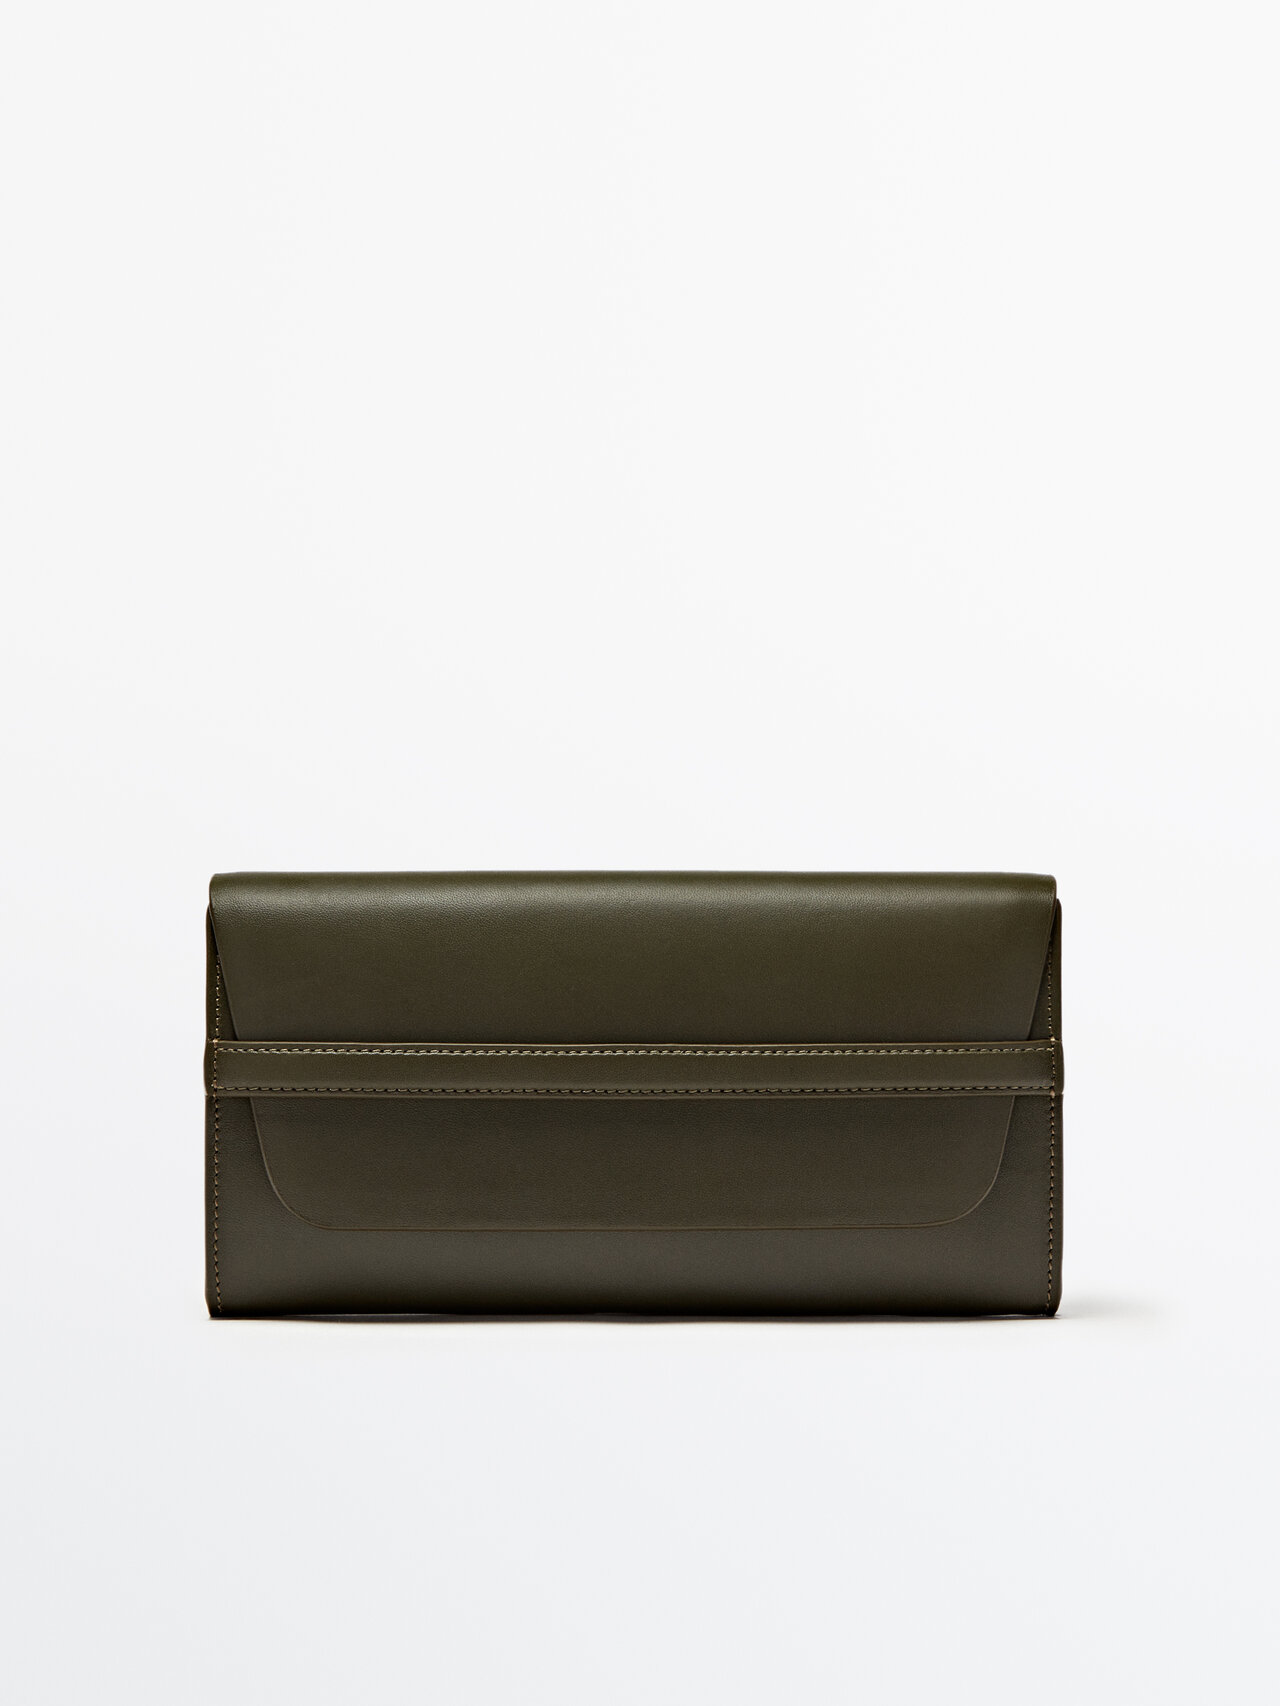 Massimo Dutti Nappa Leather Wallet With Strap In Khaki